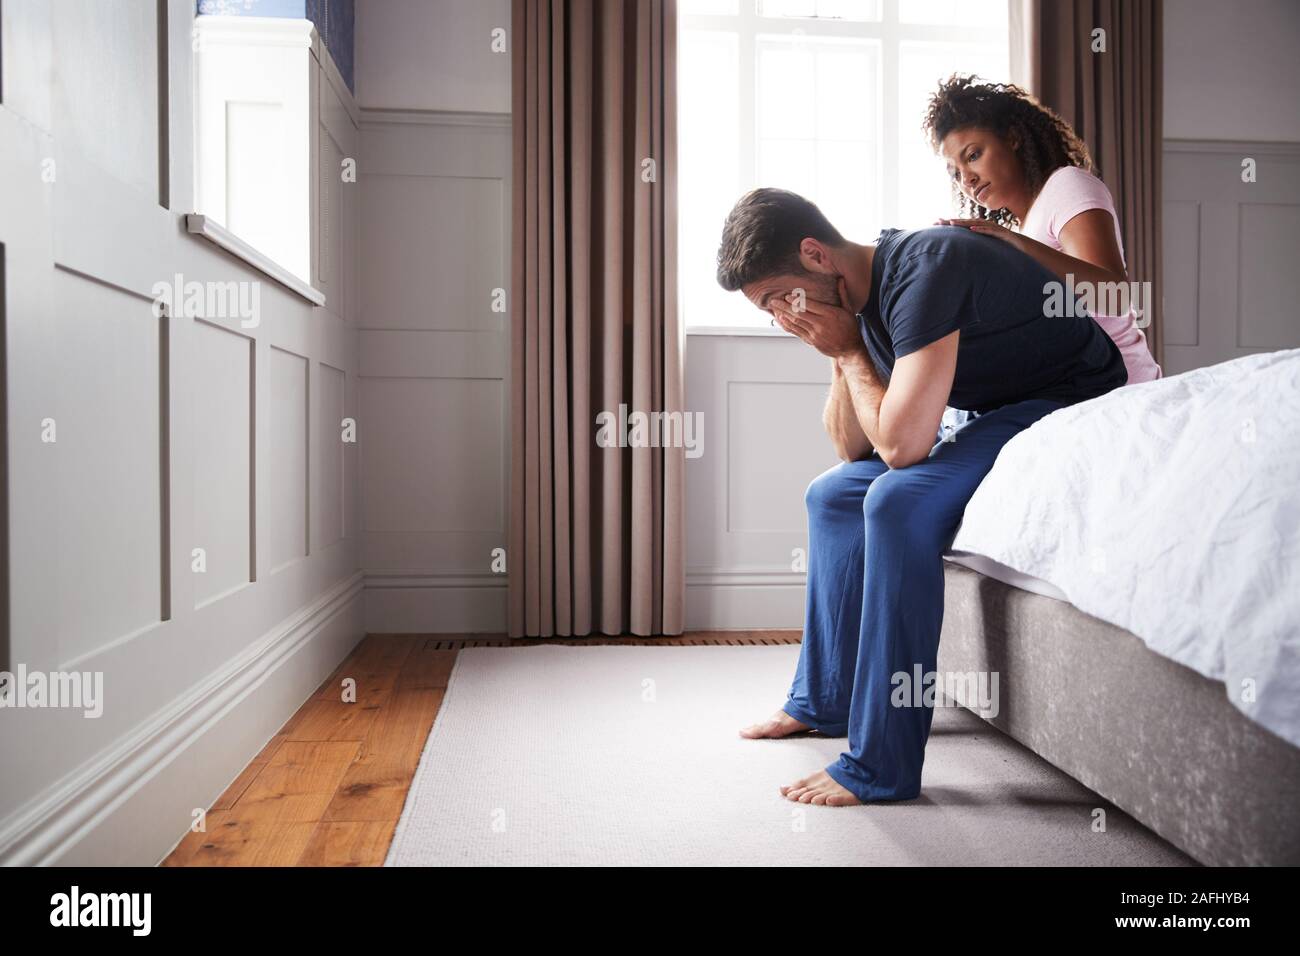 Woman Comforting Man Wearing Pajamas Suffering With Depression Sitting On Bed At Home Stock Photo